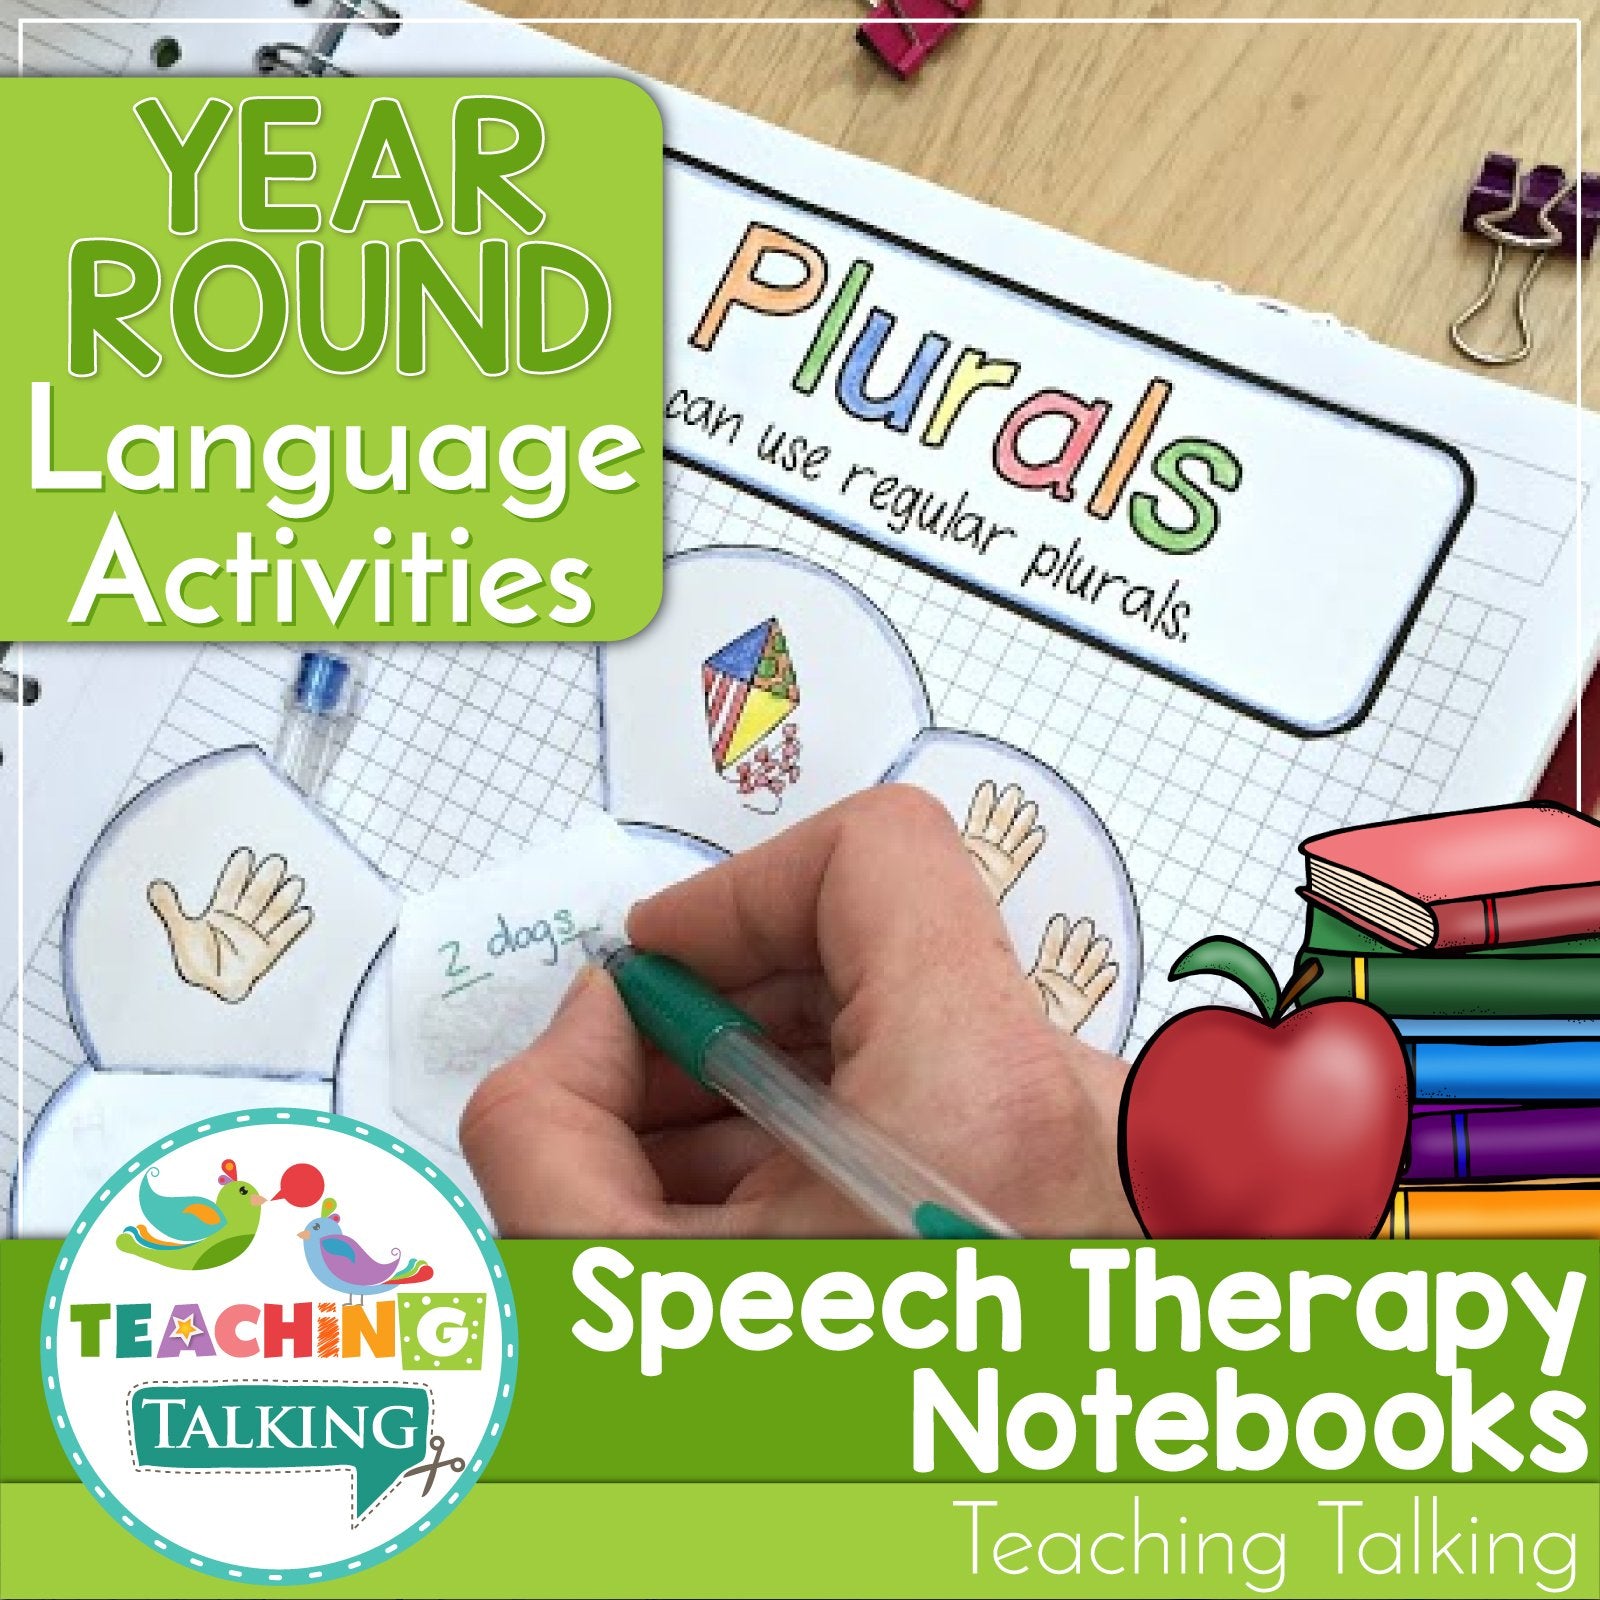 Teaching Talking Printable Speech Therapy Language Notebooks to Use All Year Round